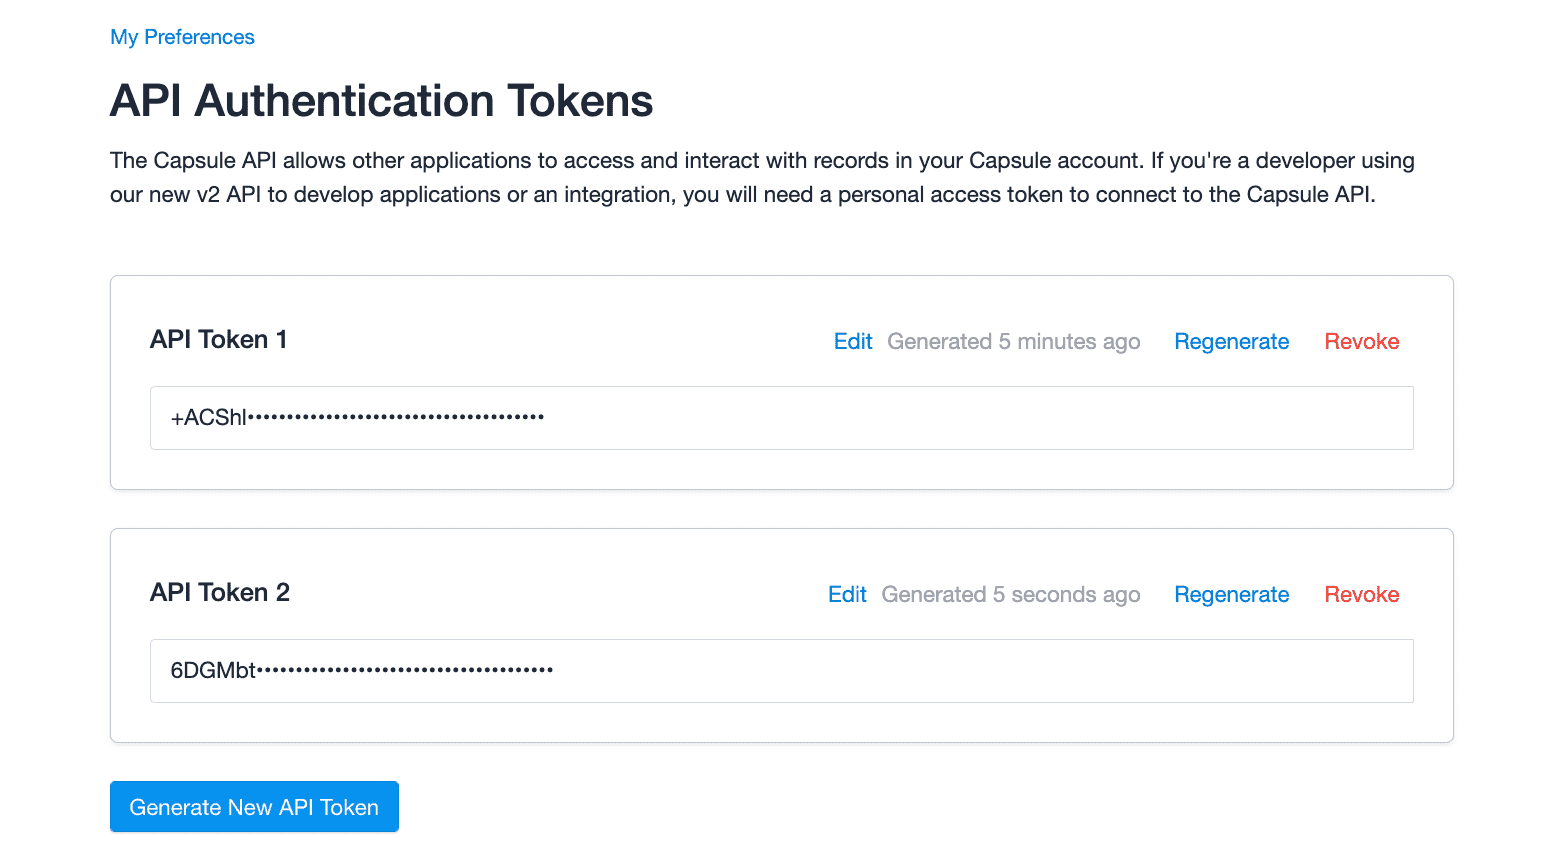 API token area in Preferences showing two truncated tokens